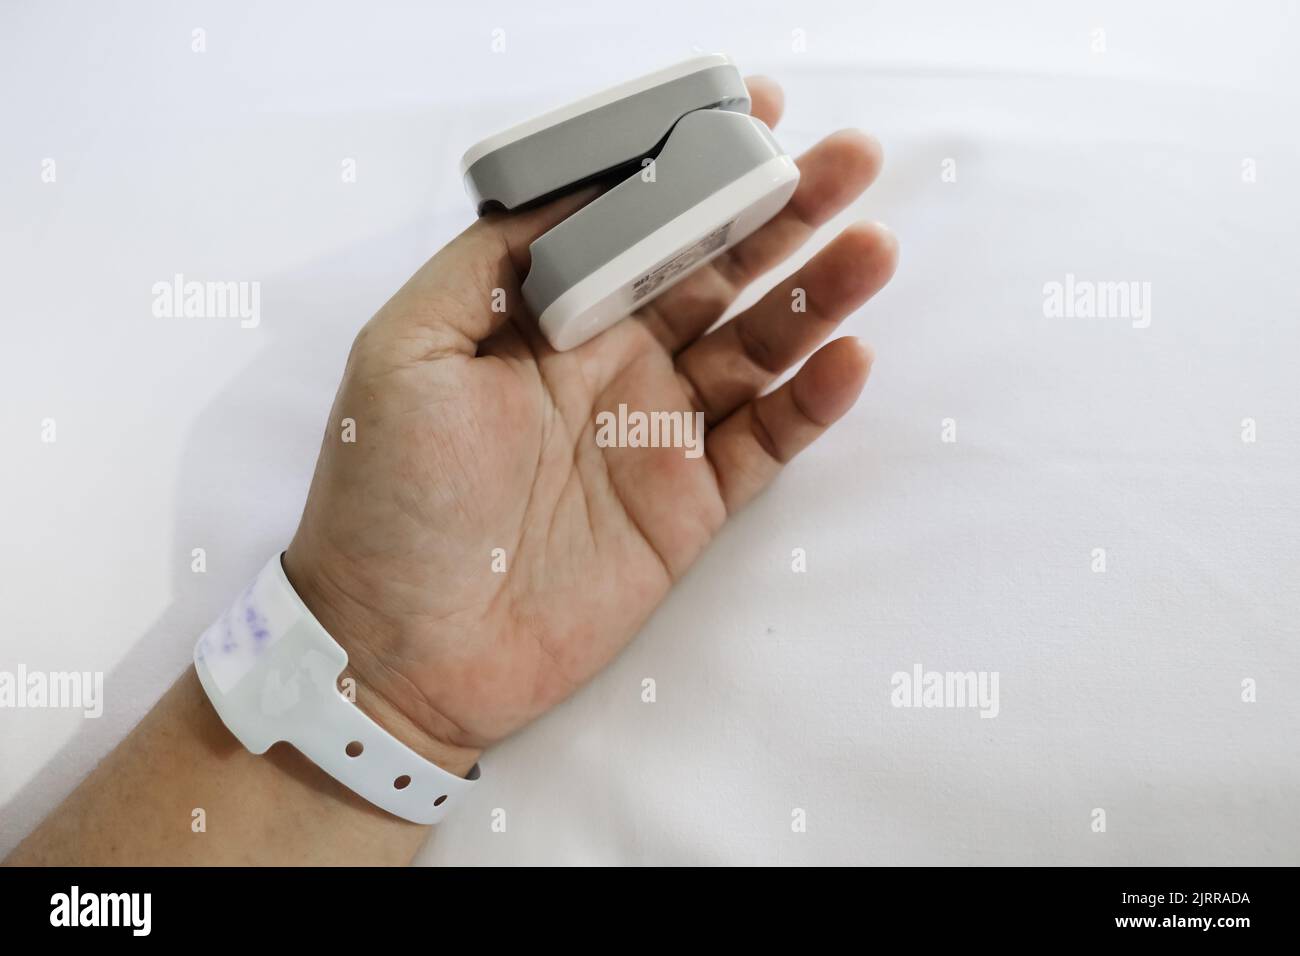 Patient on hospital bed using oximeter on thumb for measuring pulse and heart rate Stock Photo